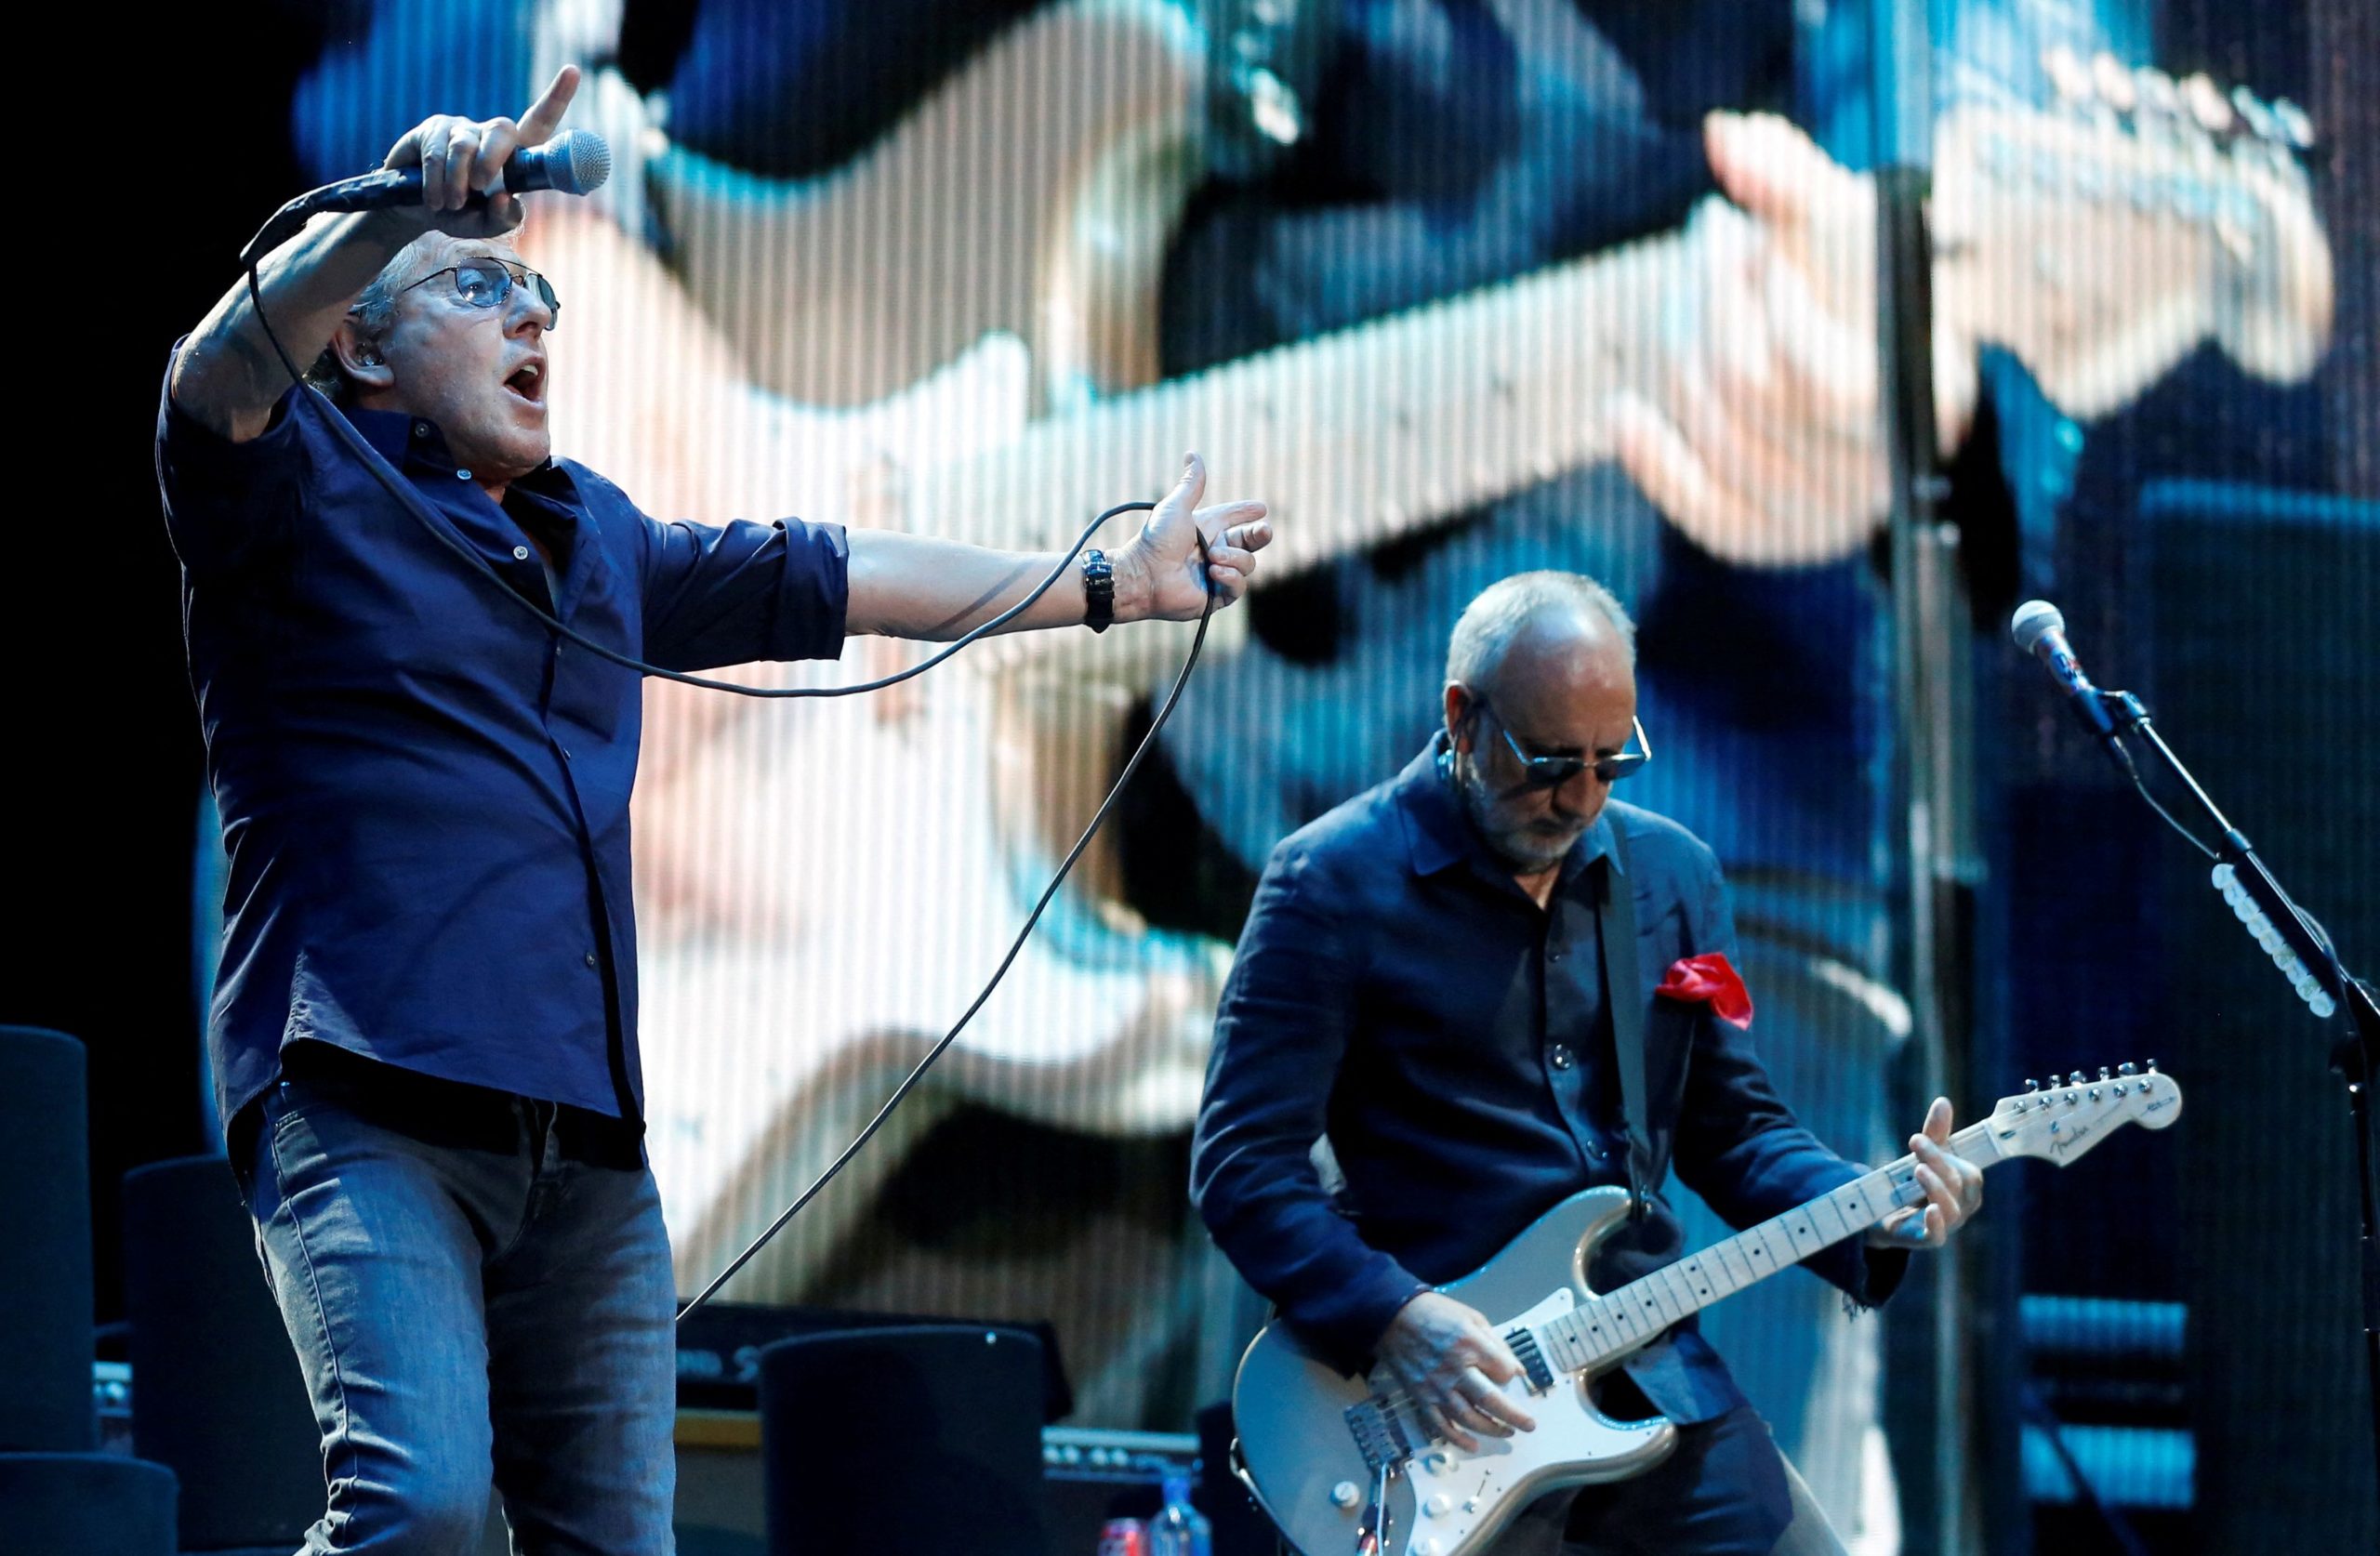 Roger Daltrey (L) and Pete Townshend of The Who perform at Desert Trip music festival at Empire Polo Club in Indio, California U.S., October 9, 2016.   REUTERS/Mario Anzuoni